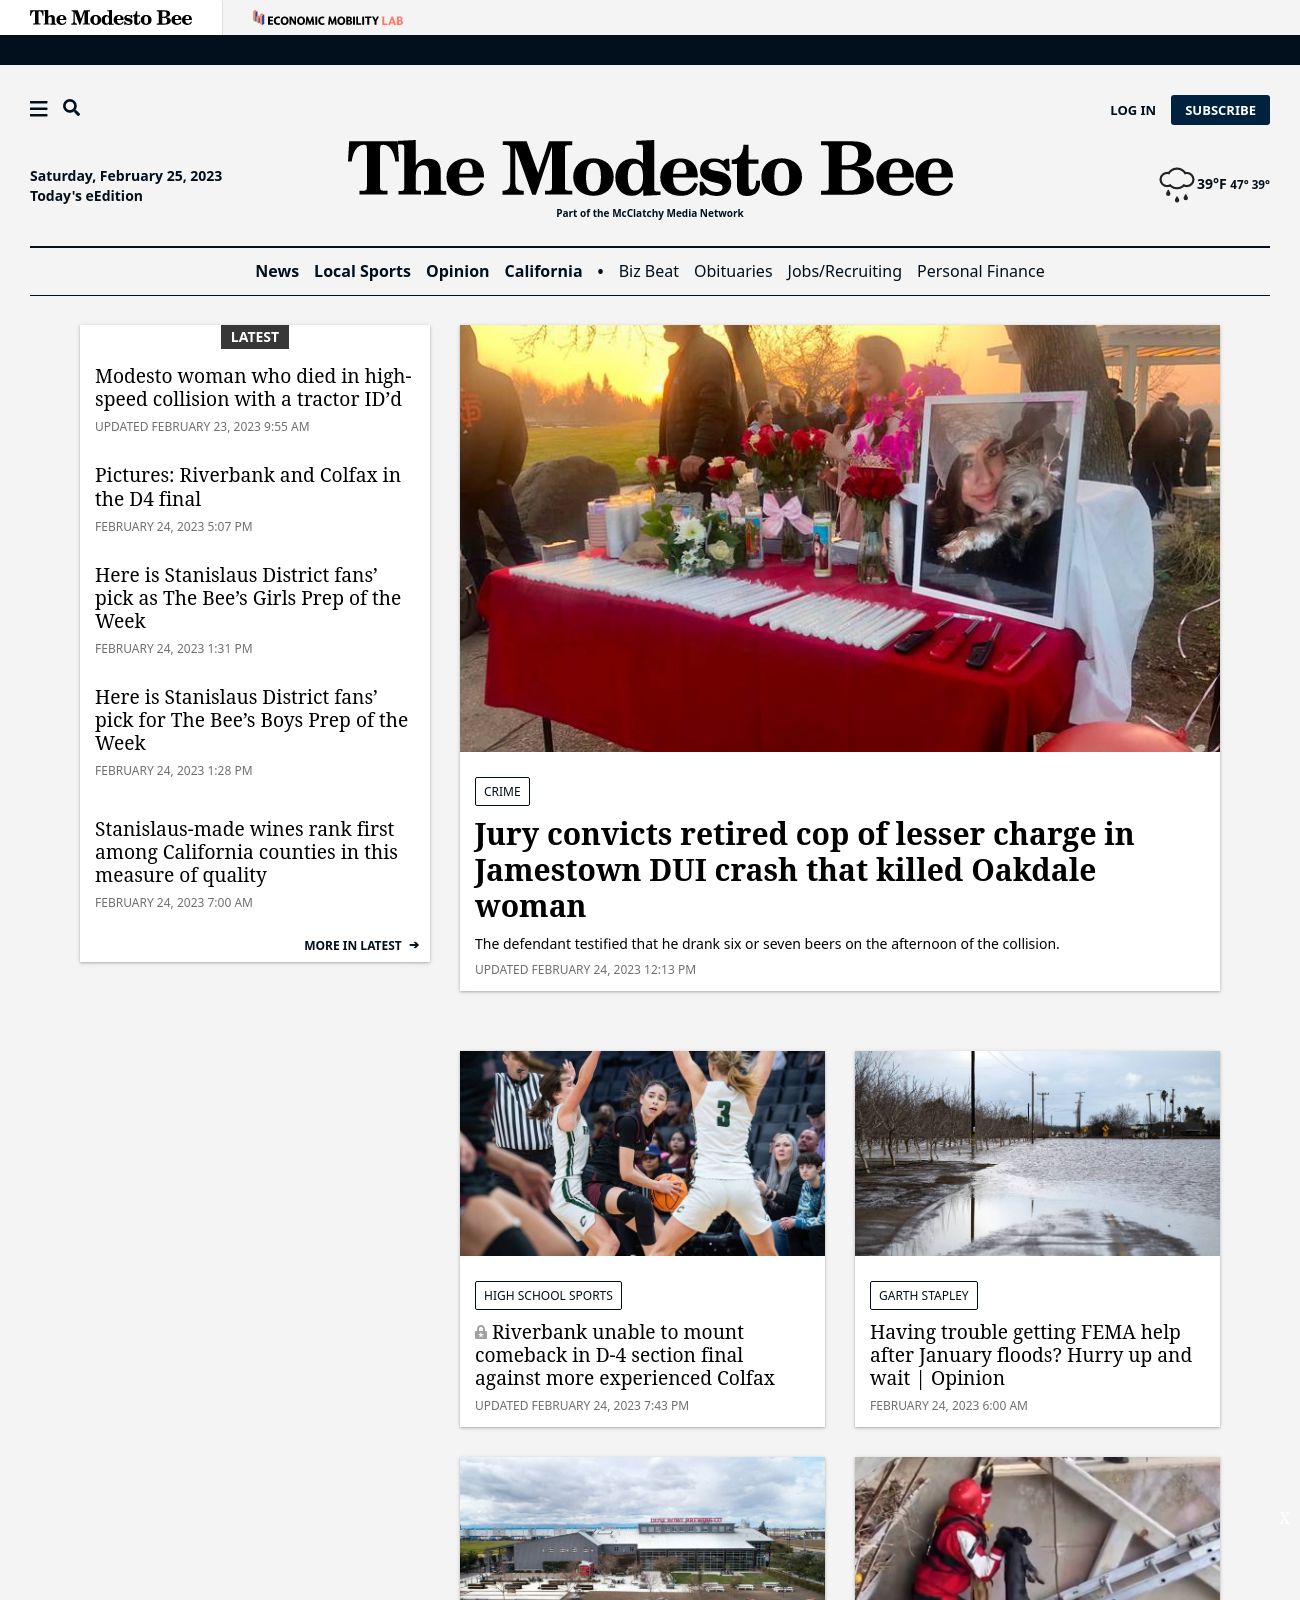 The Modesto Bee at 2023-02-25 06:00:20-08:00 local time